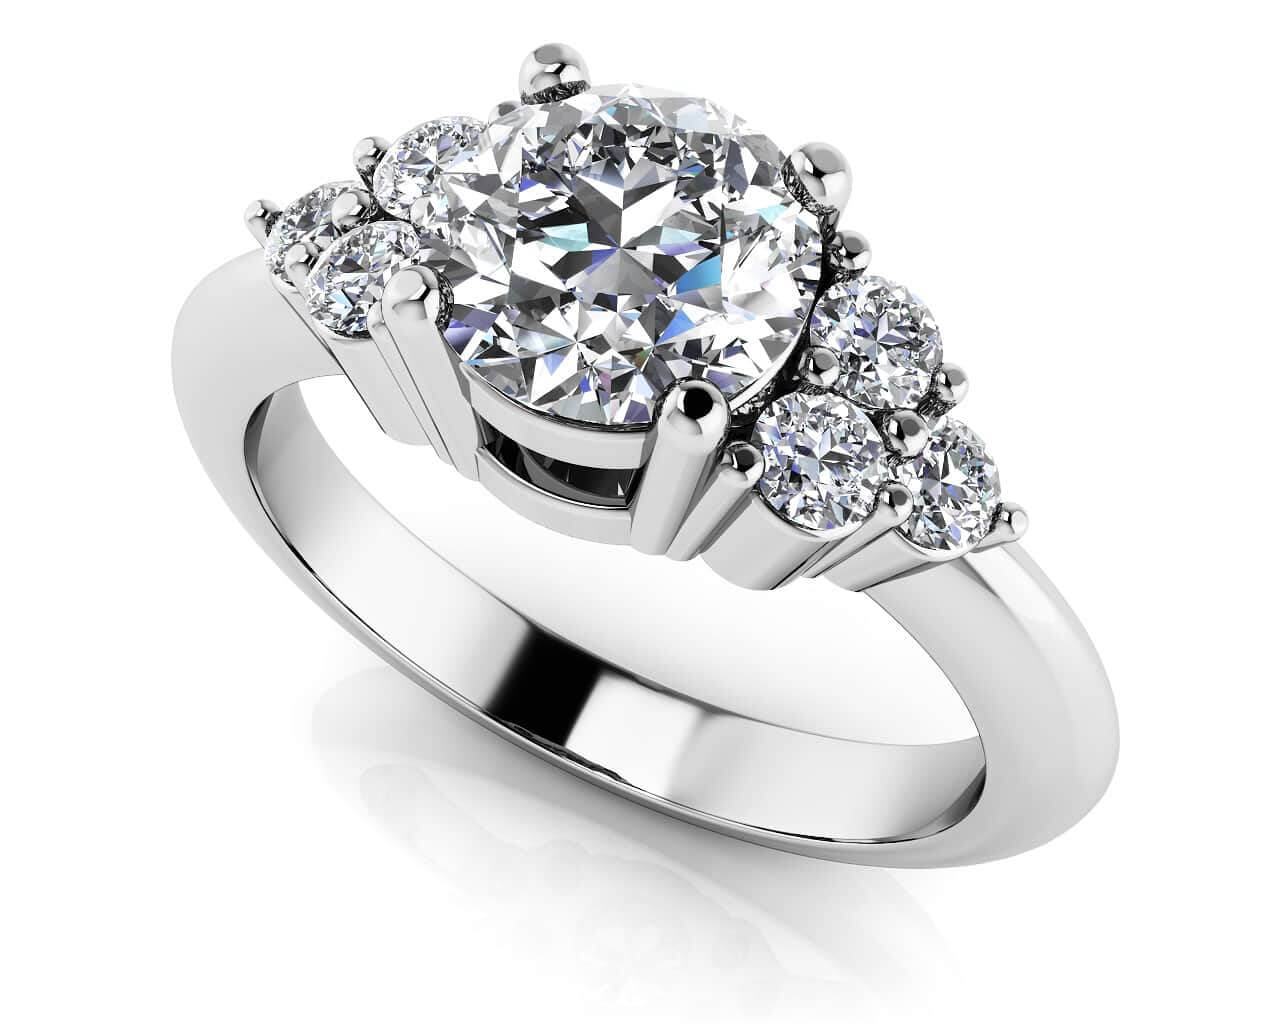 Tie The Knot Diamond Engagement Ring In 18K Or 14K White Gold And ...